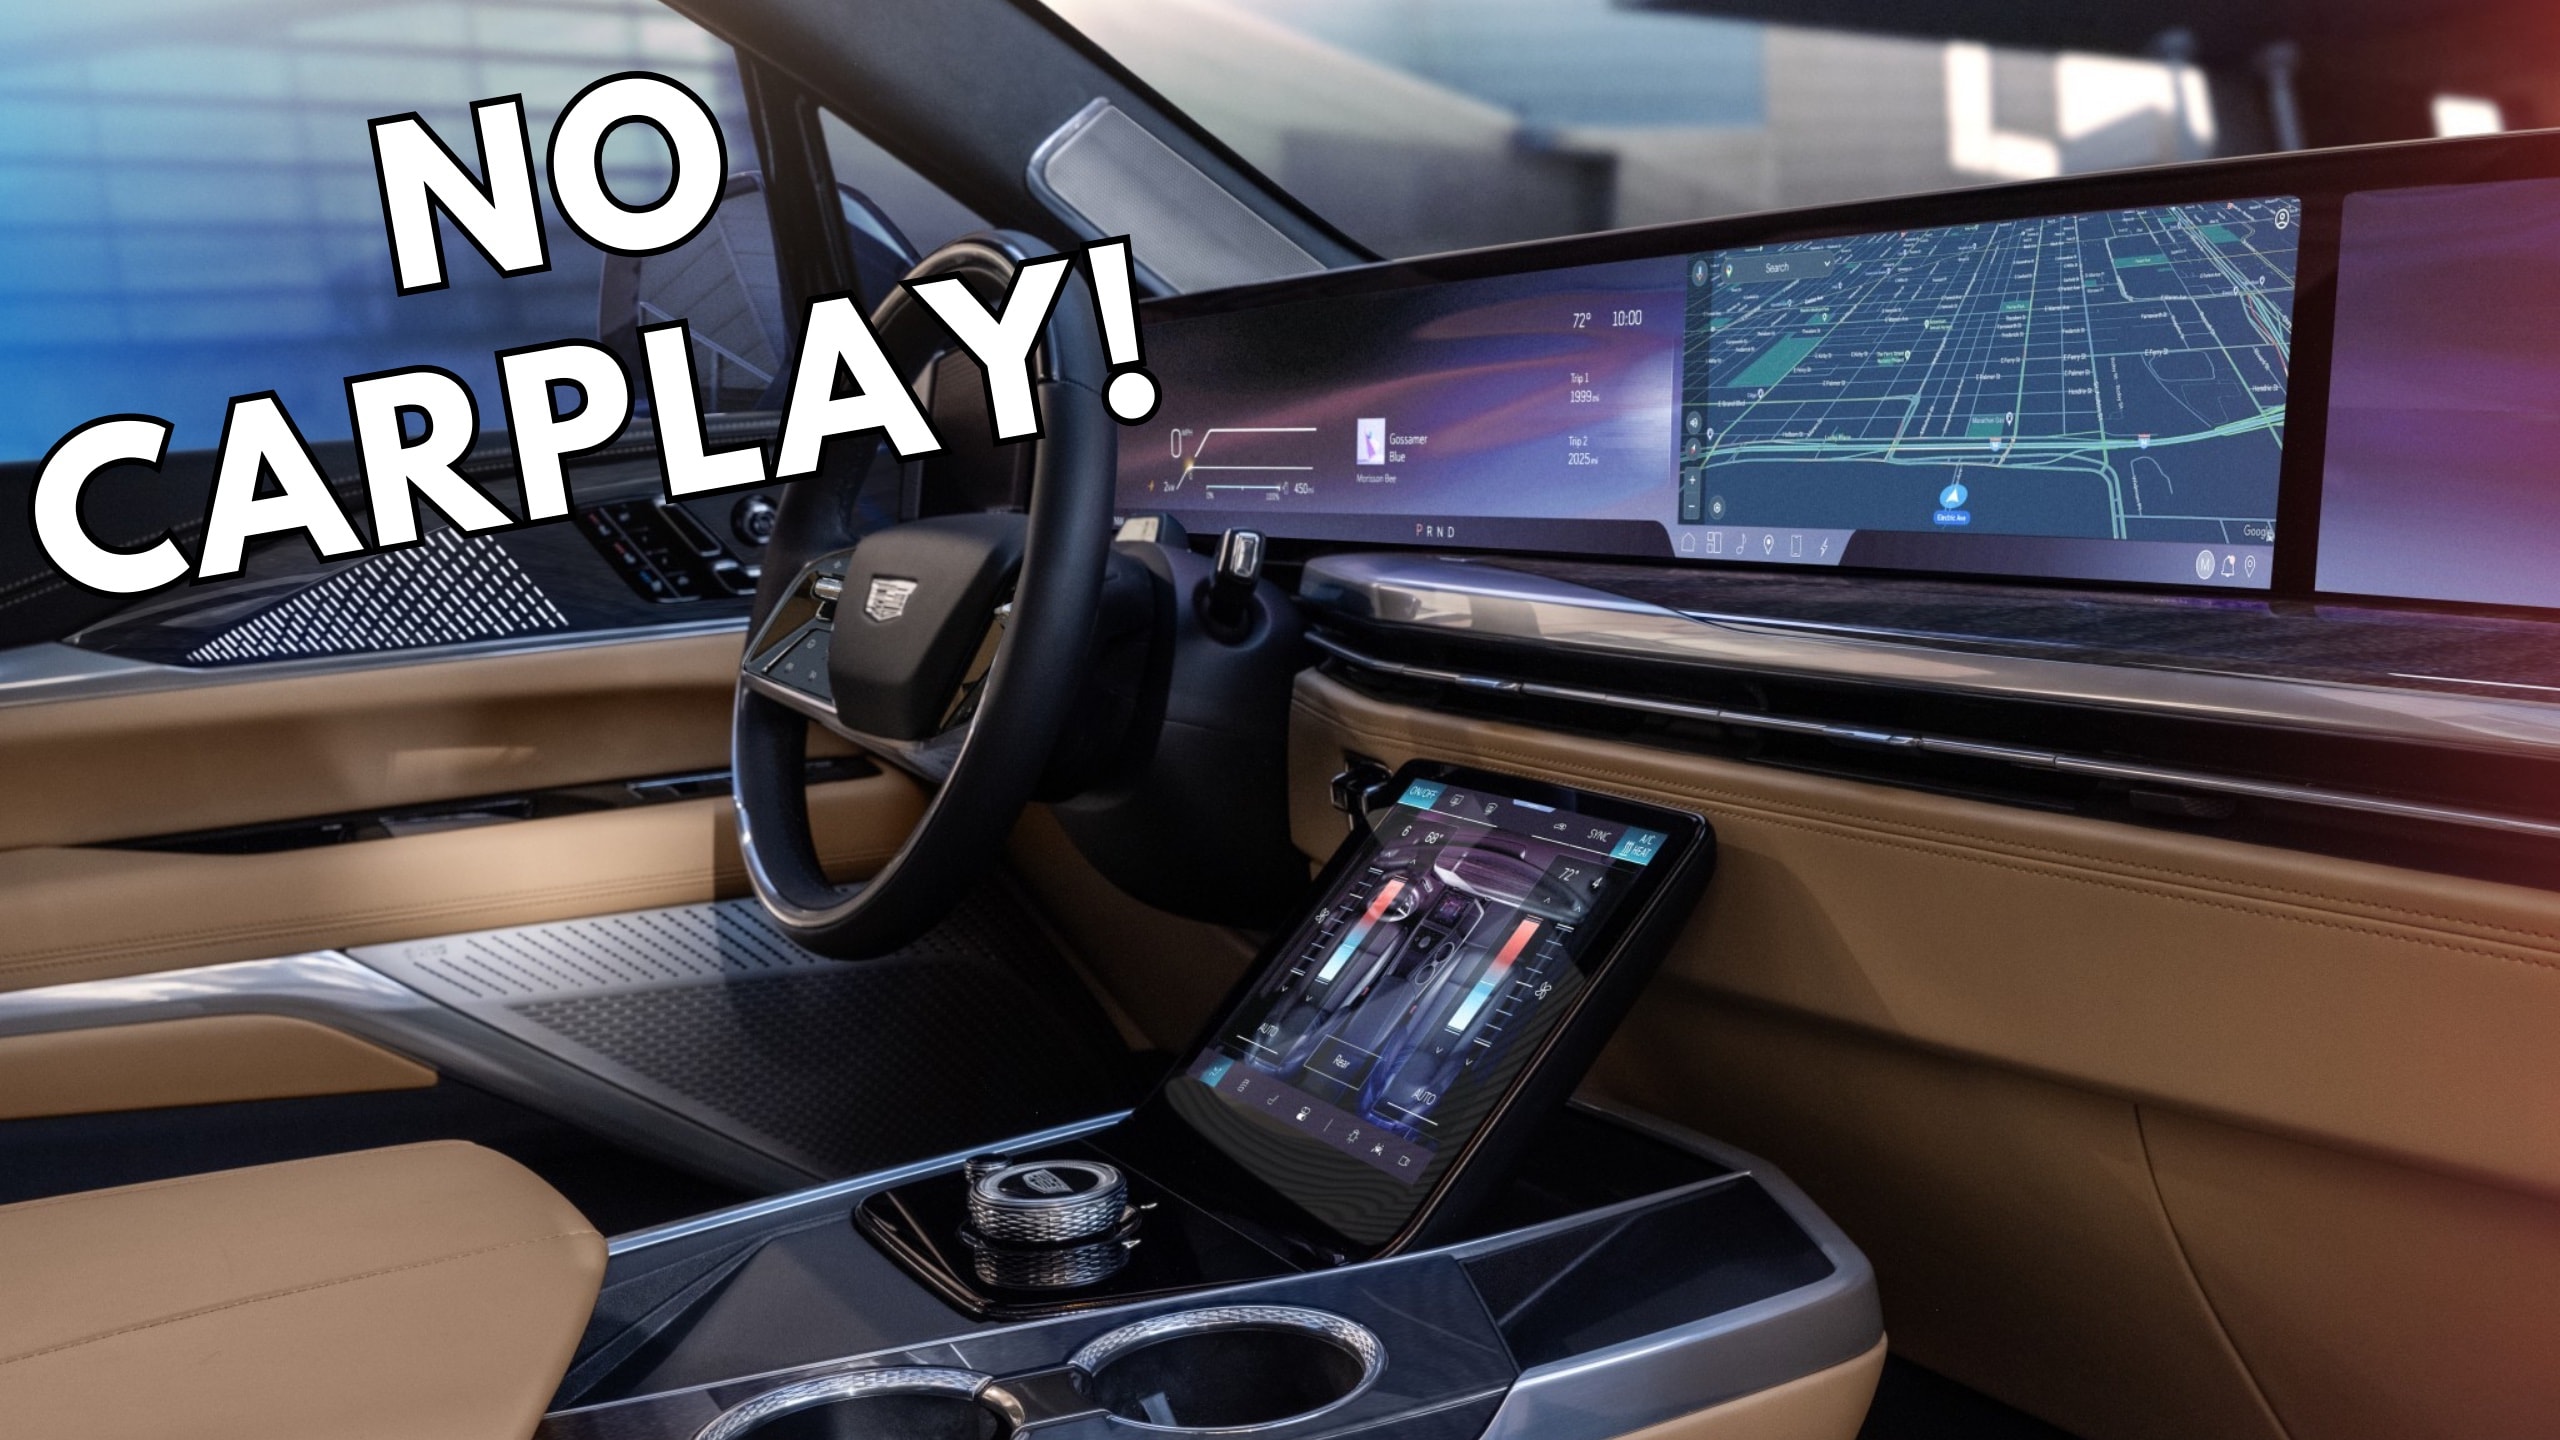 How to Use Wireless Apple CarPlay & Android Auto in GM Vehicles